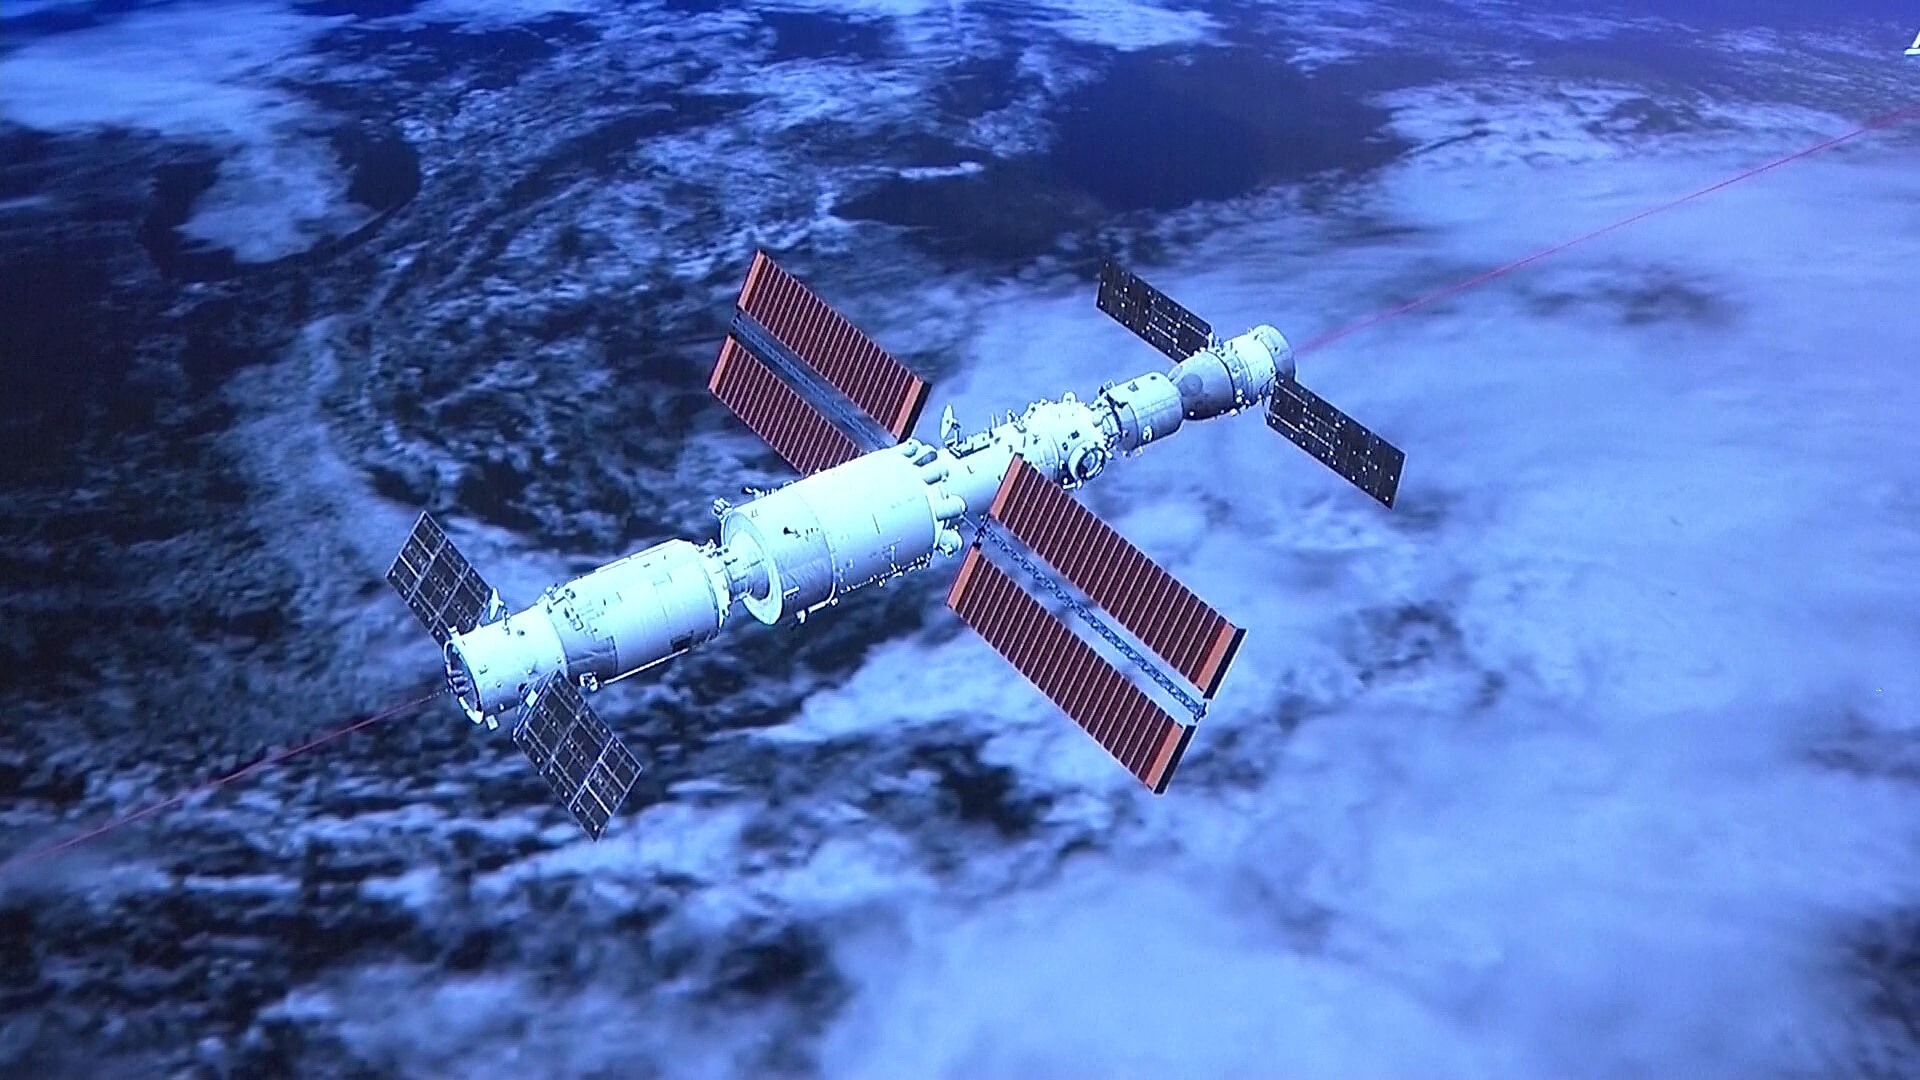 Tiangong Space Station: China's Modular Artificial Satellite Core Module is called Tianhe. 1920x1080 Full HD Background.